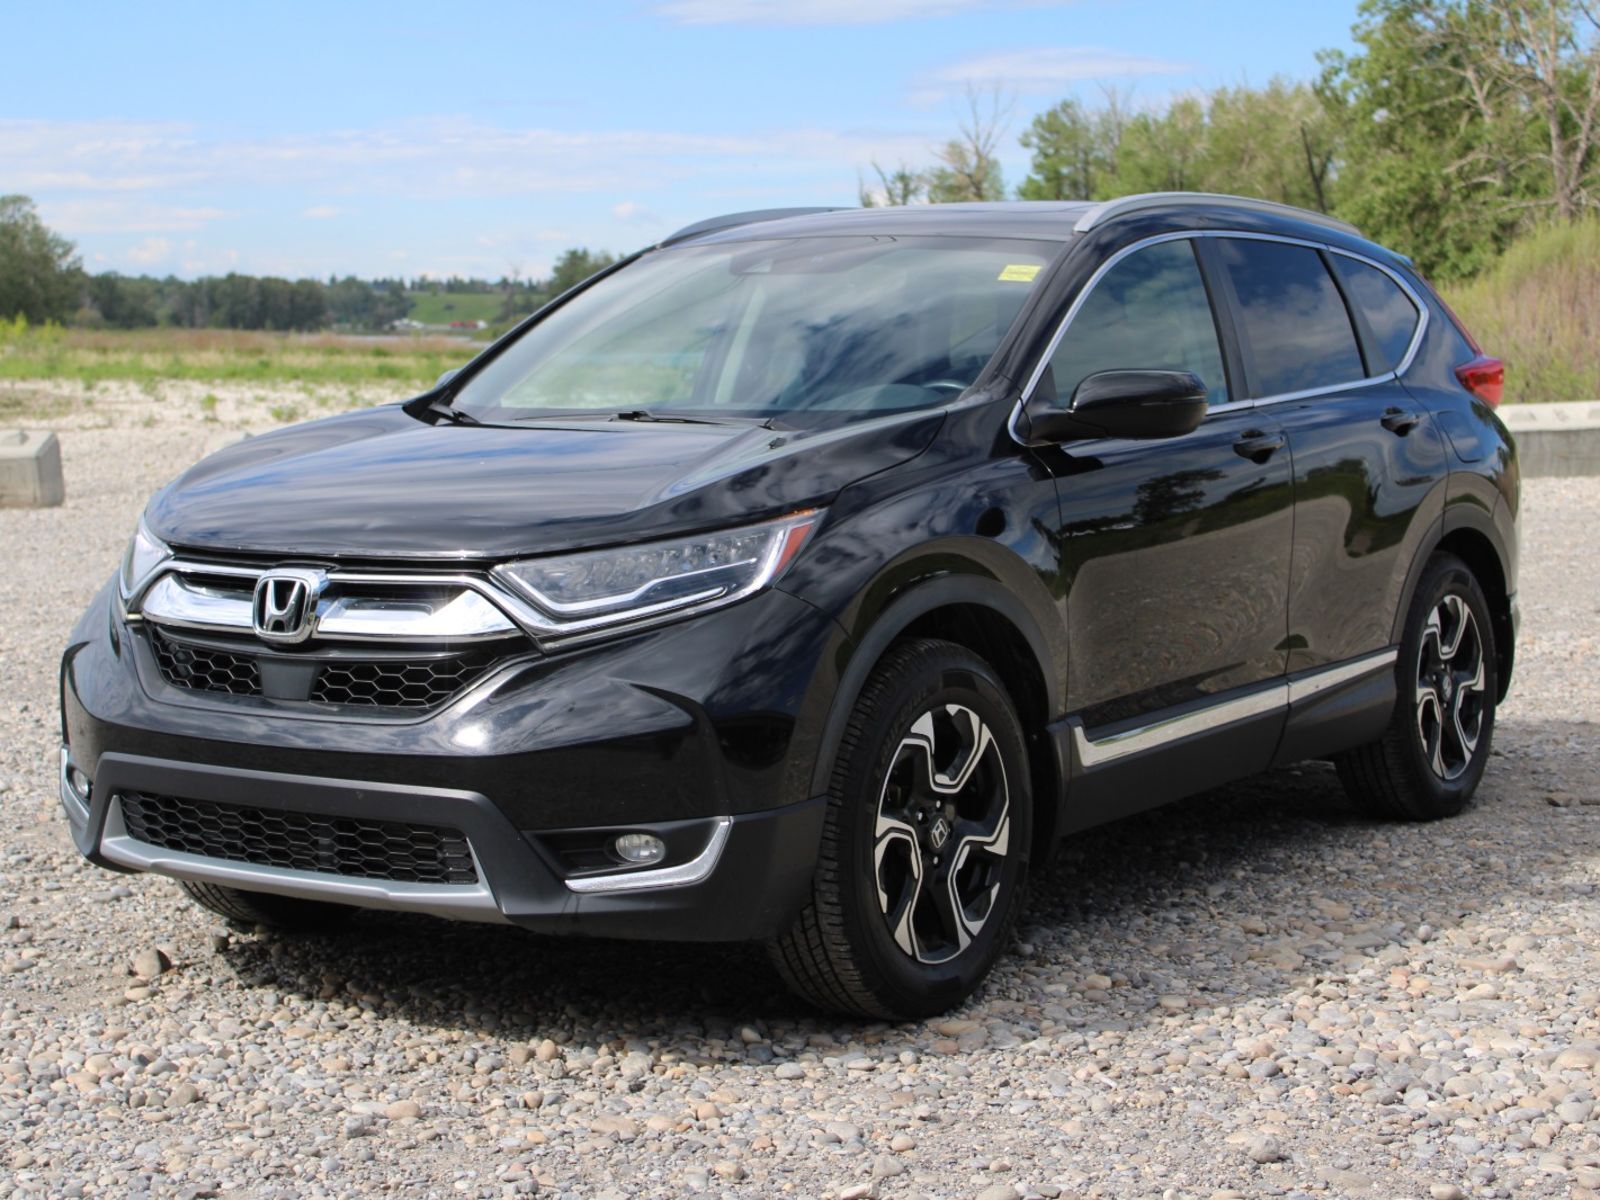 2018 Honda CR-V TOURING -  NEW TIRES, WIPERS, ALIGNMENT AND SERVIC